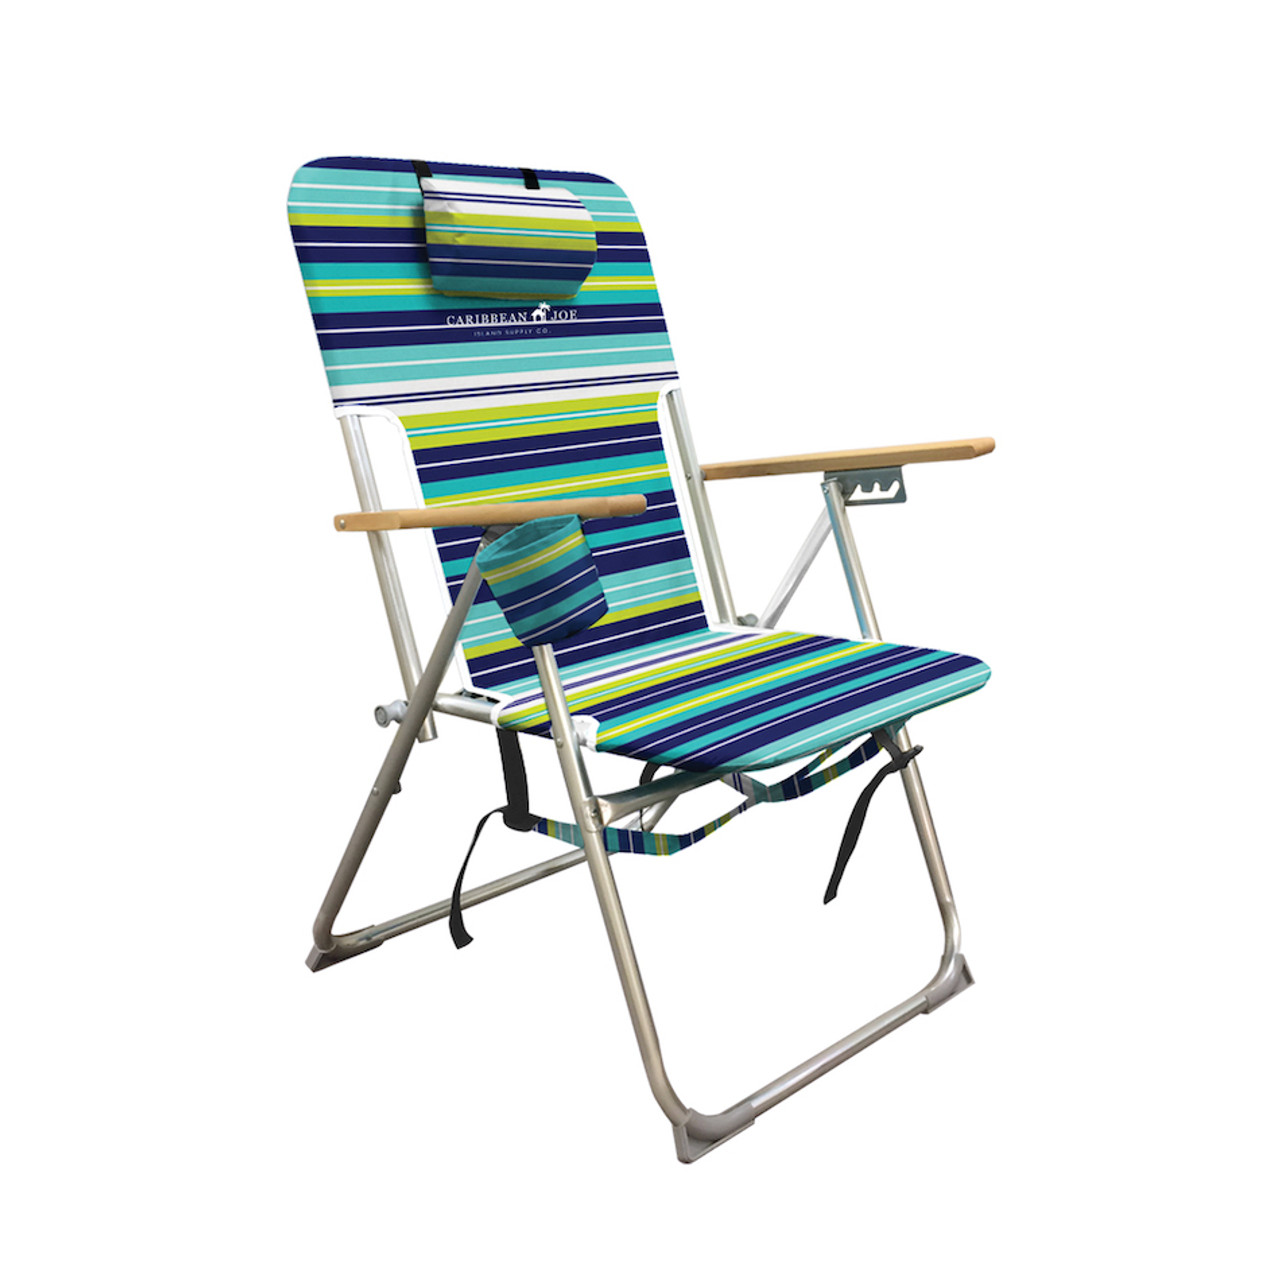 A large striped beach chair with blue, yellow, and green stripes.